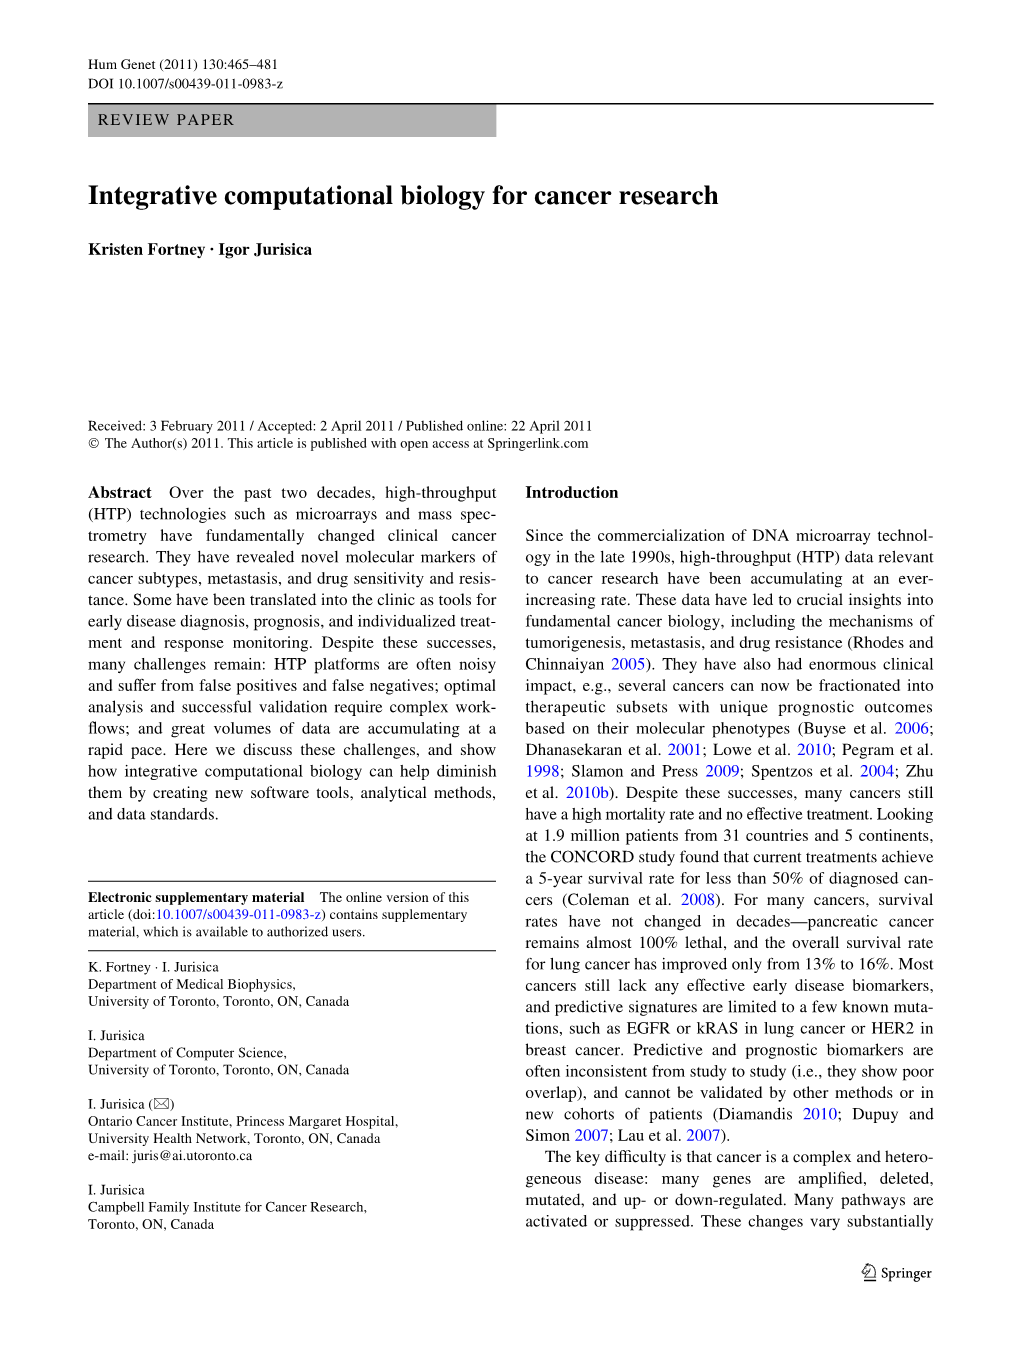 Integrative Computational Biology for Cancer Research